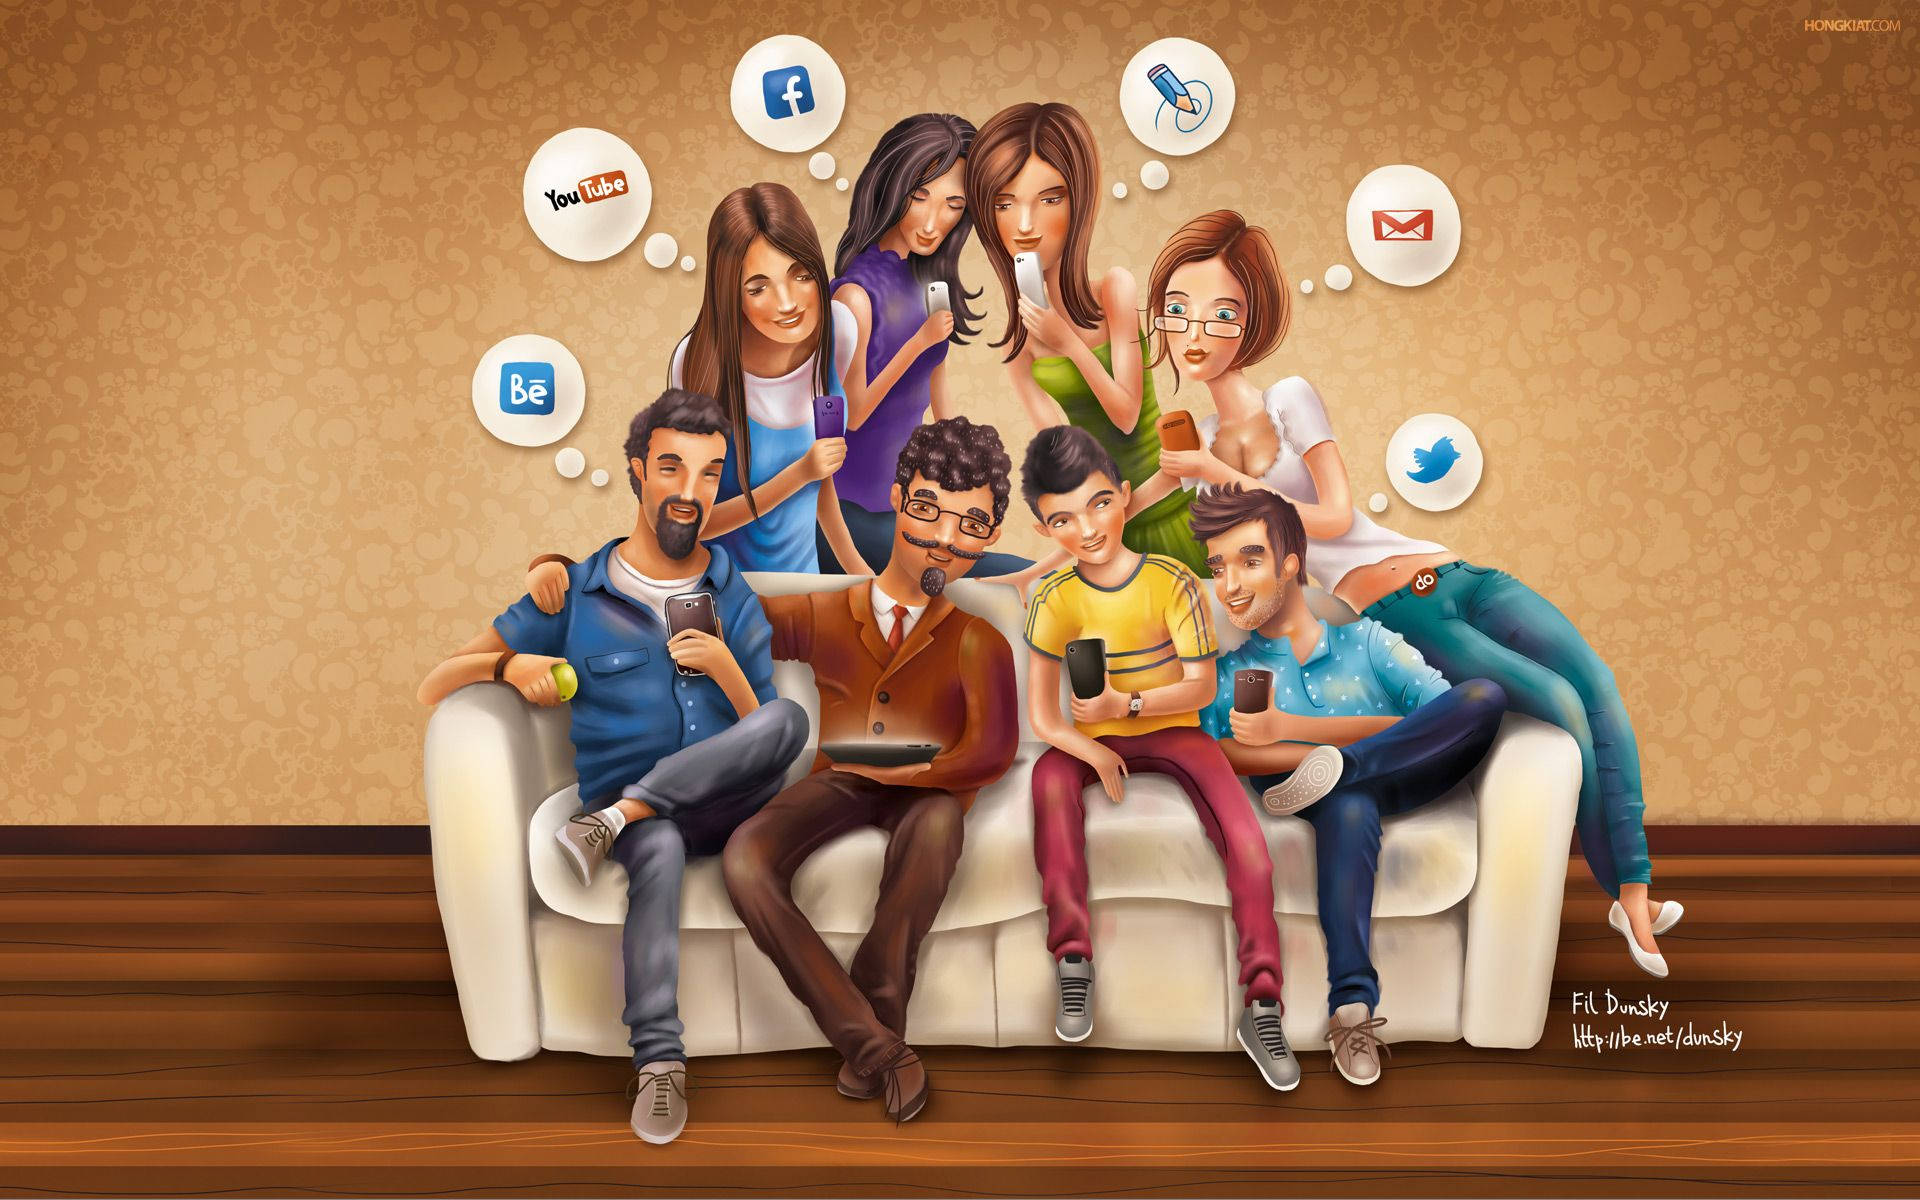 Social Network Influence To Family